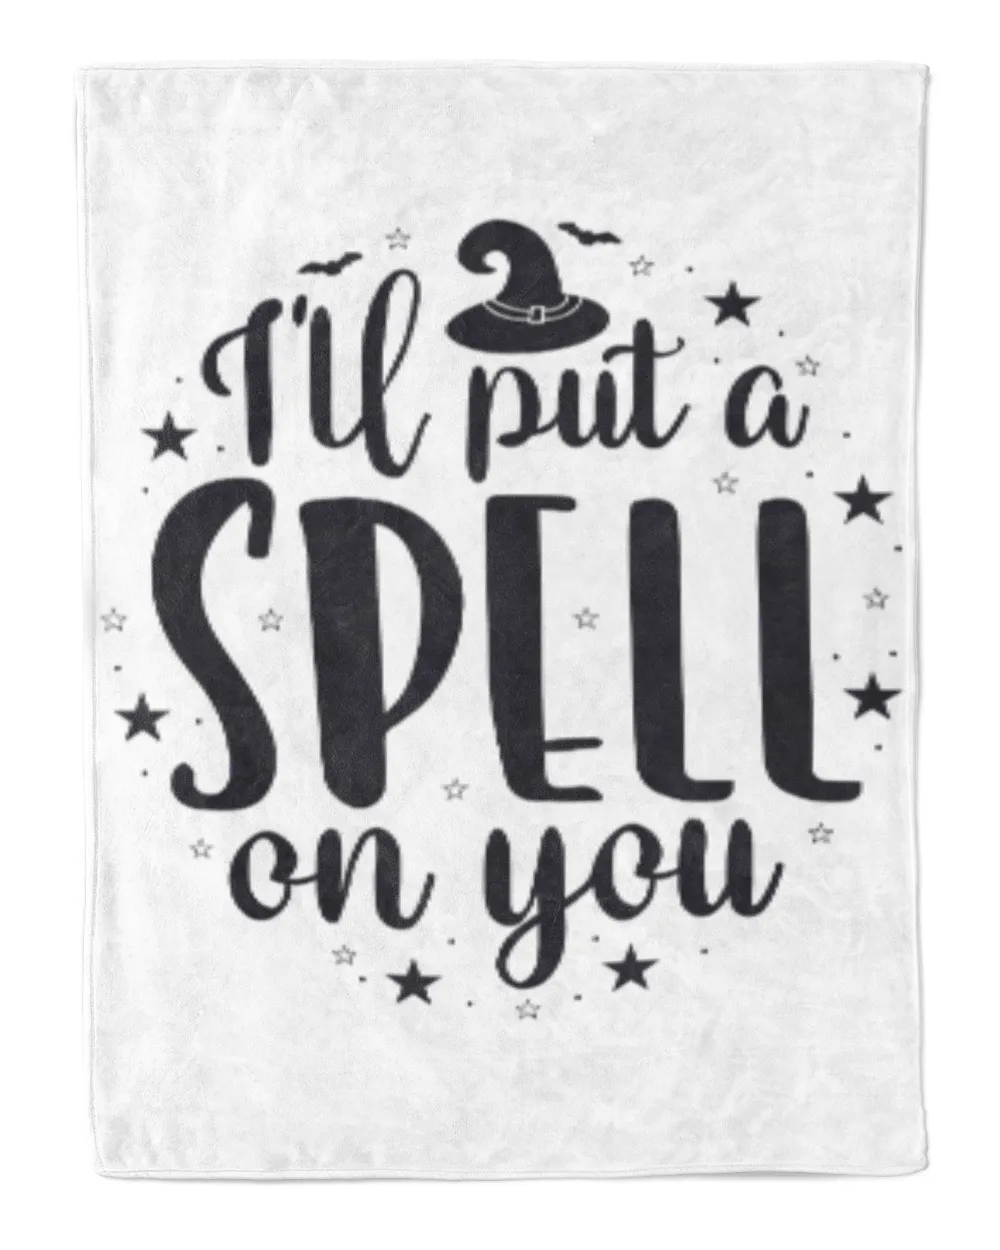 Funny quote for Halloween I will put a spell on you